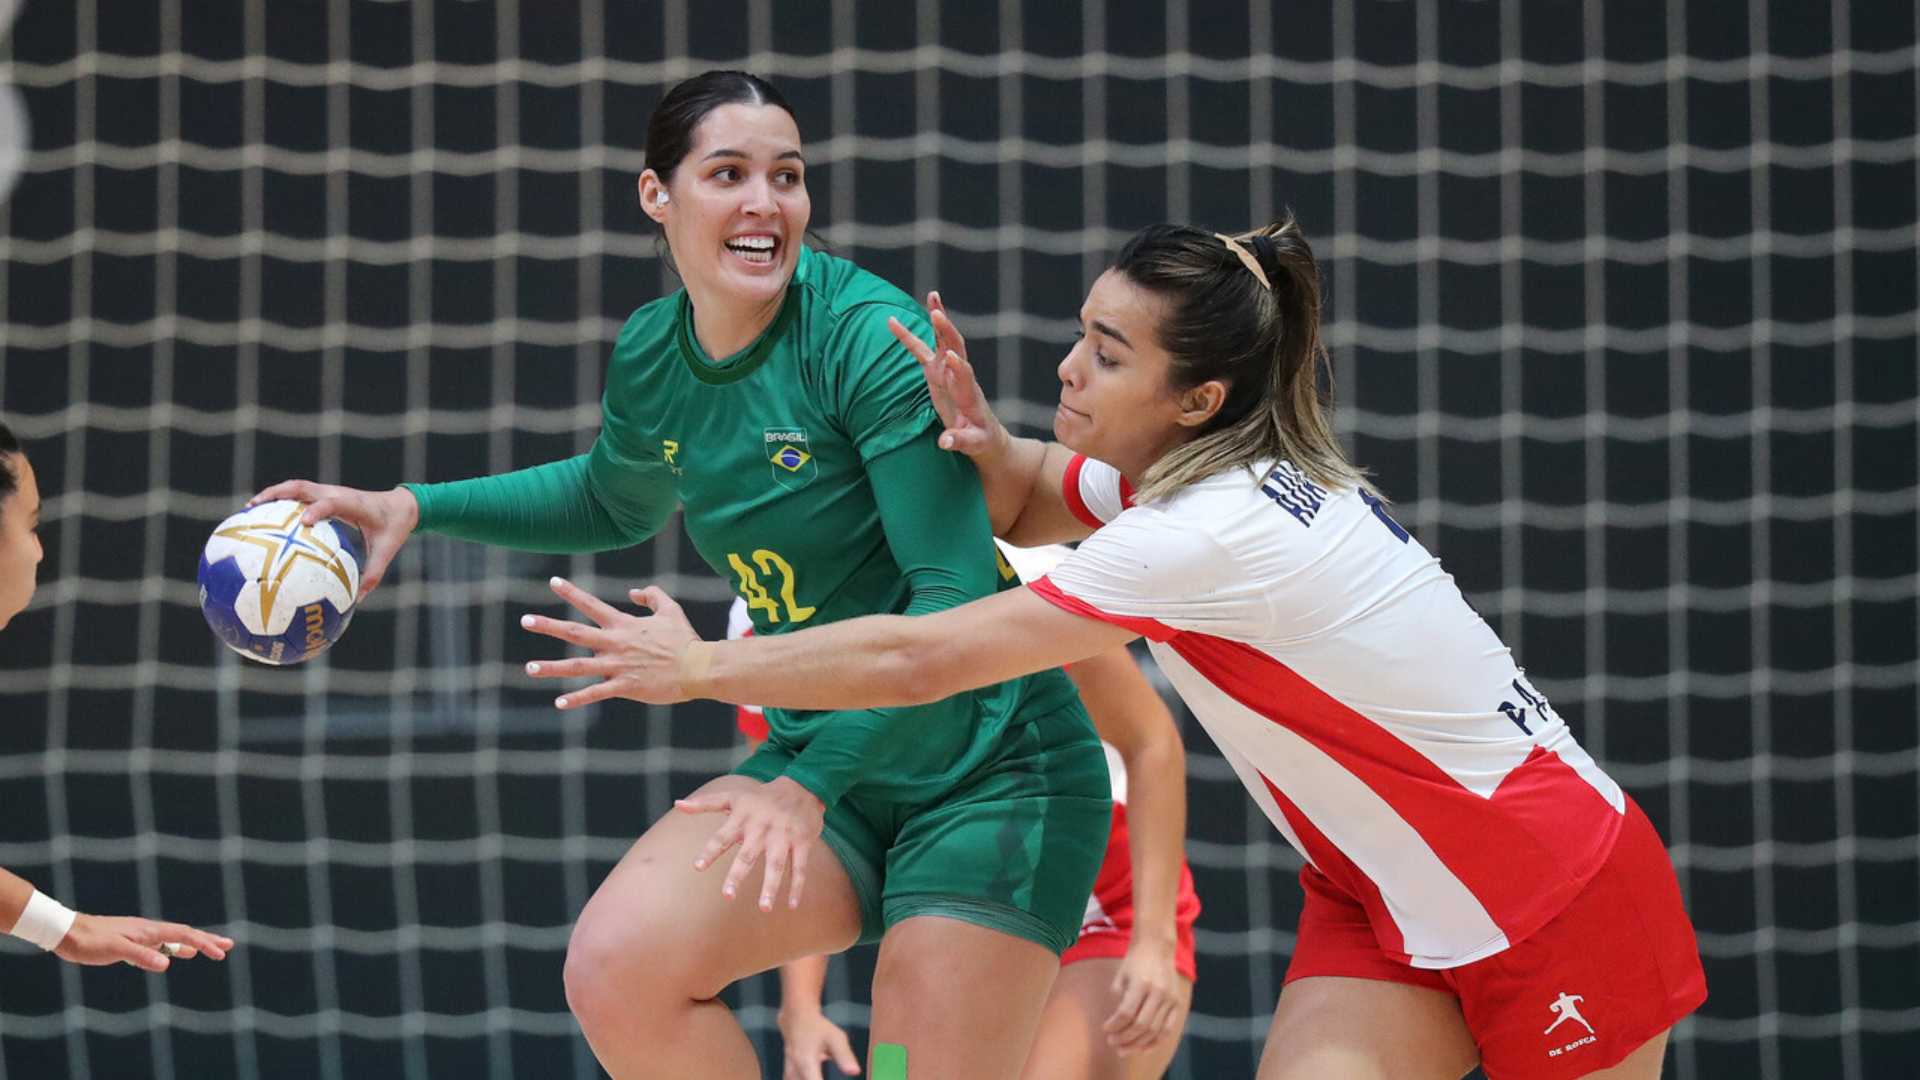 Brazil defends the gold in female's handball by defeating Paraguay